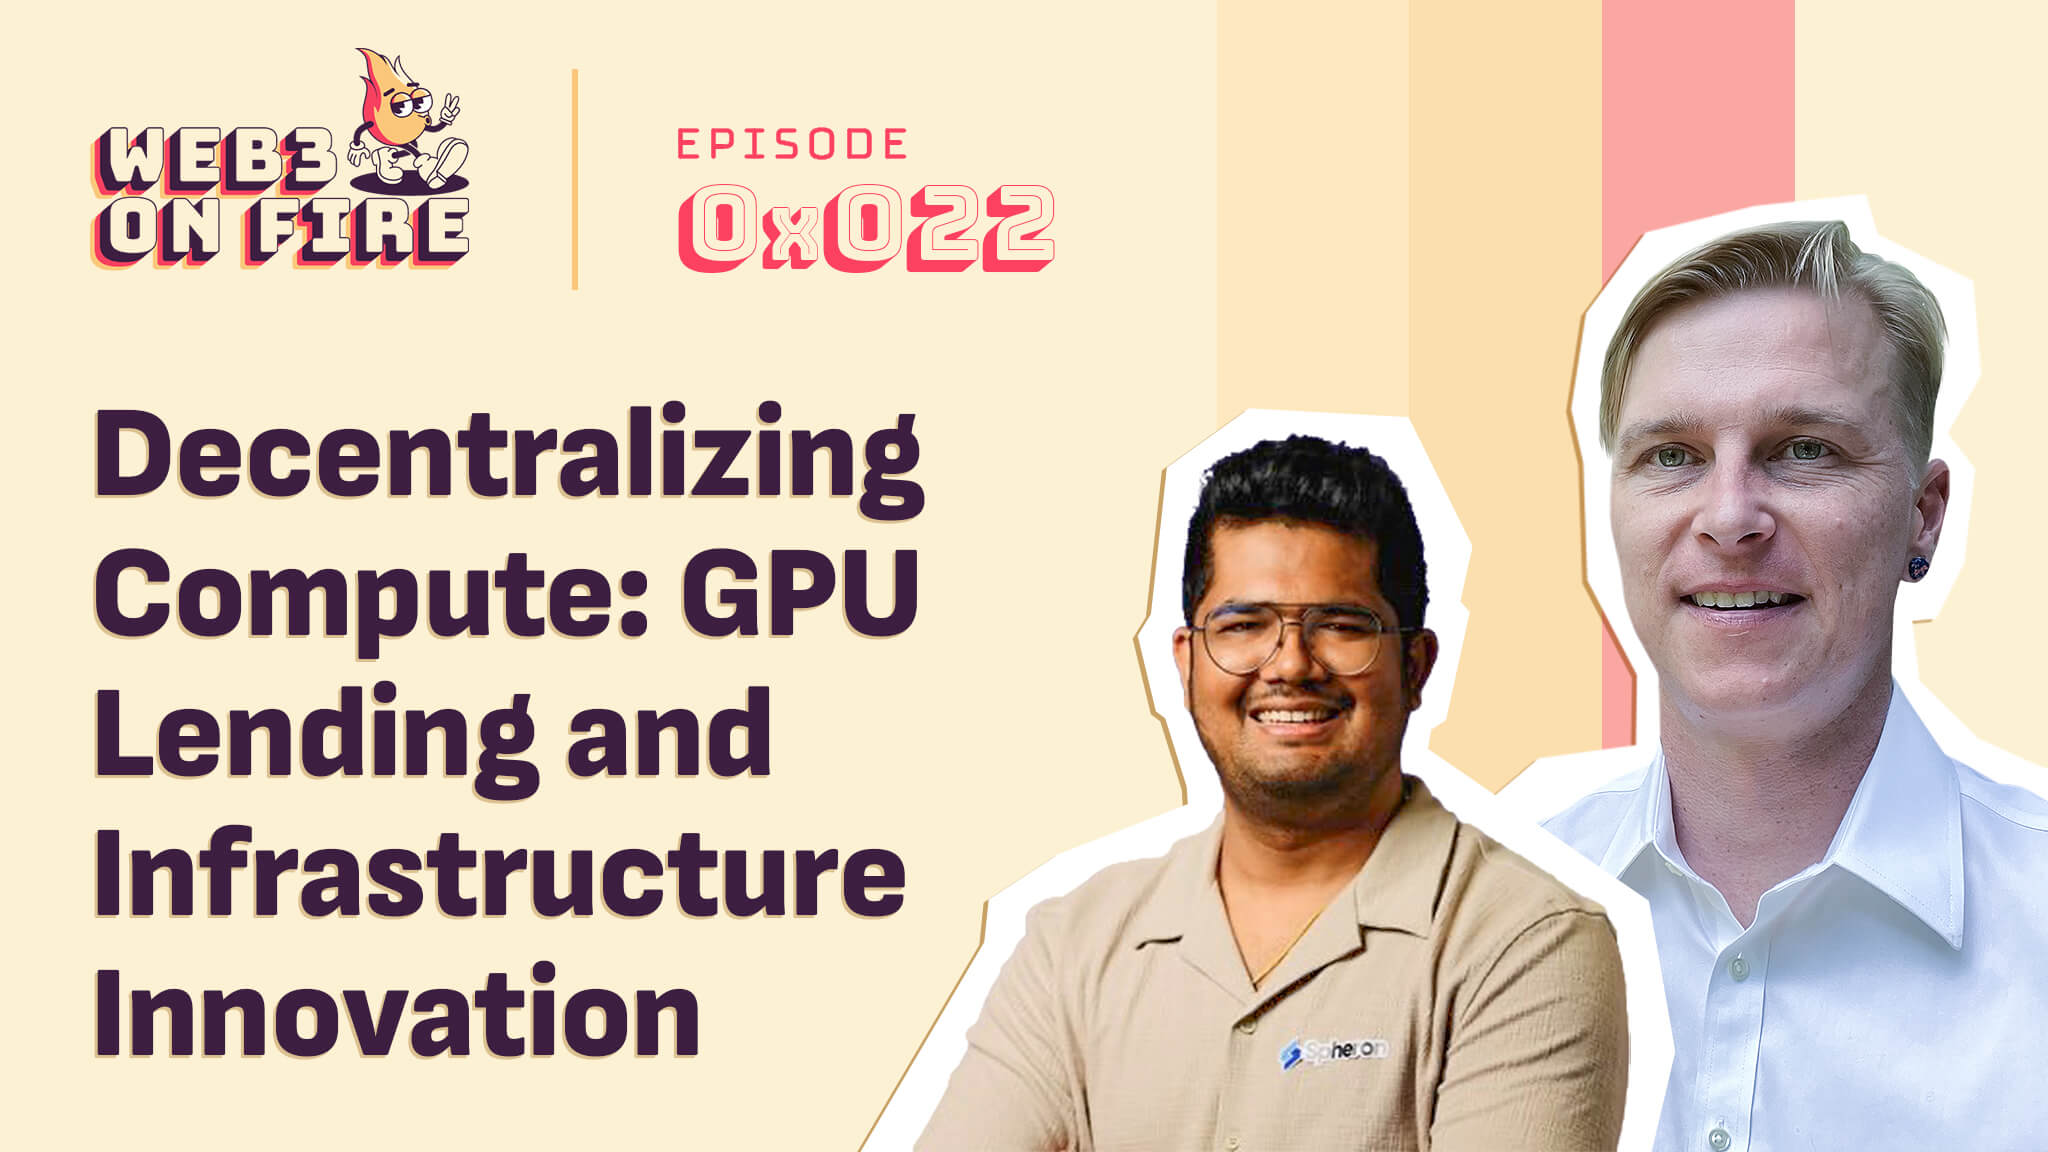 Decentralizing Compute: GPU Lending and Infrastructure Innovation